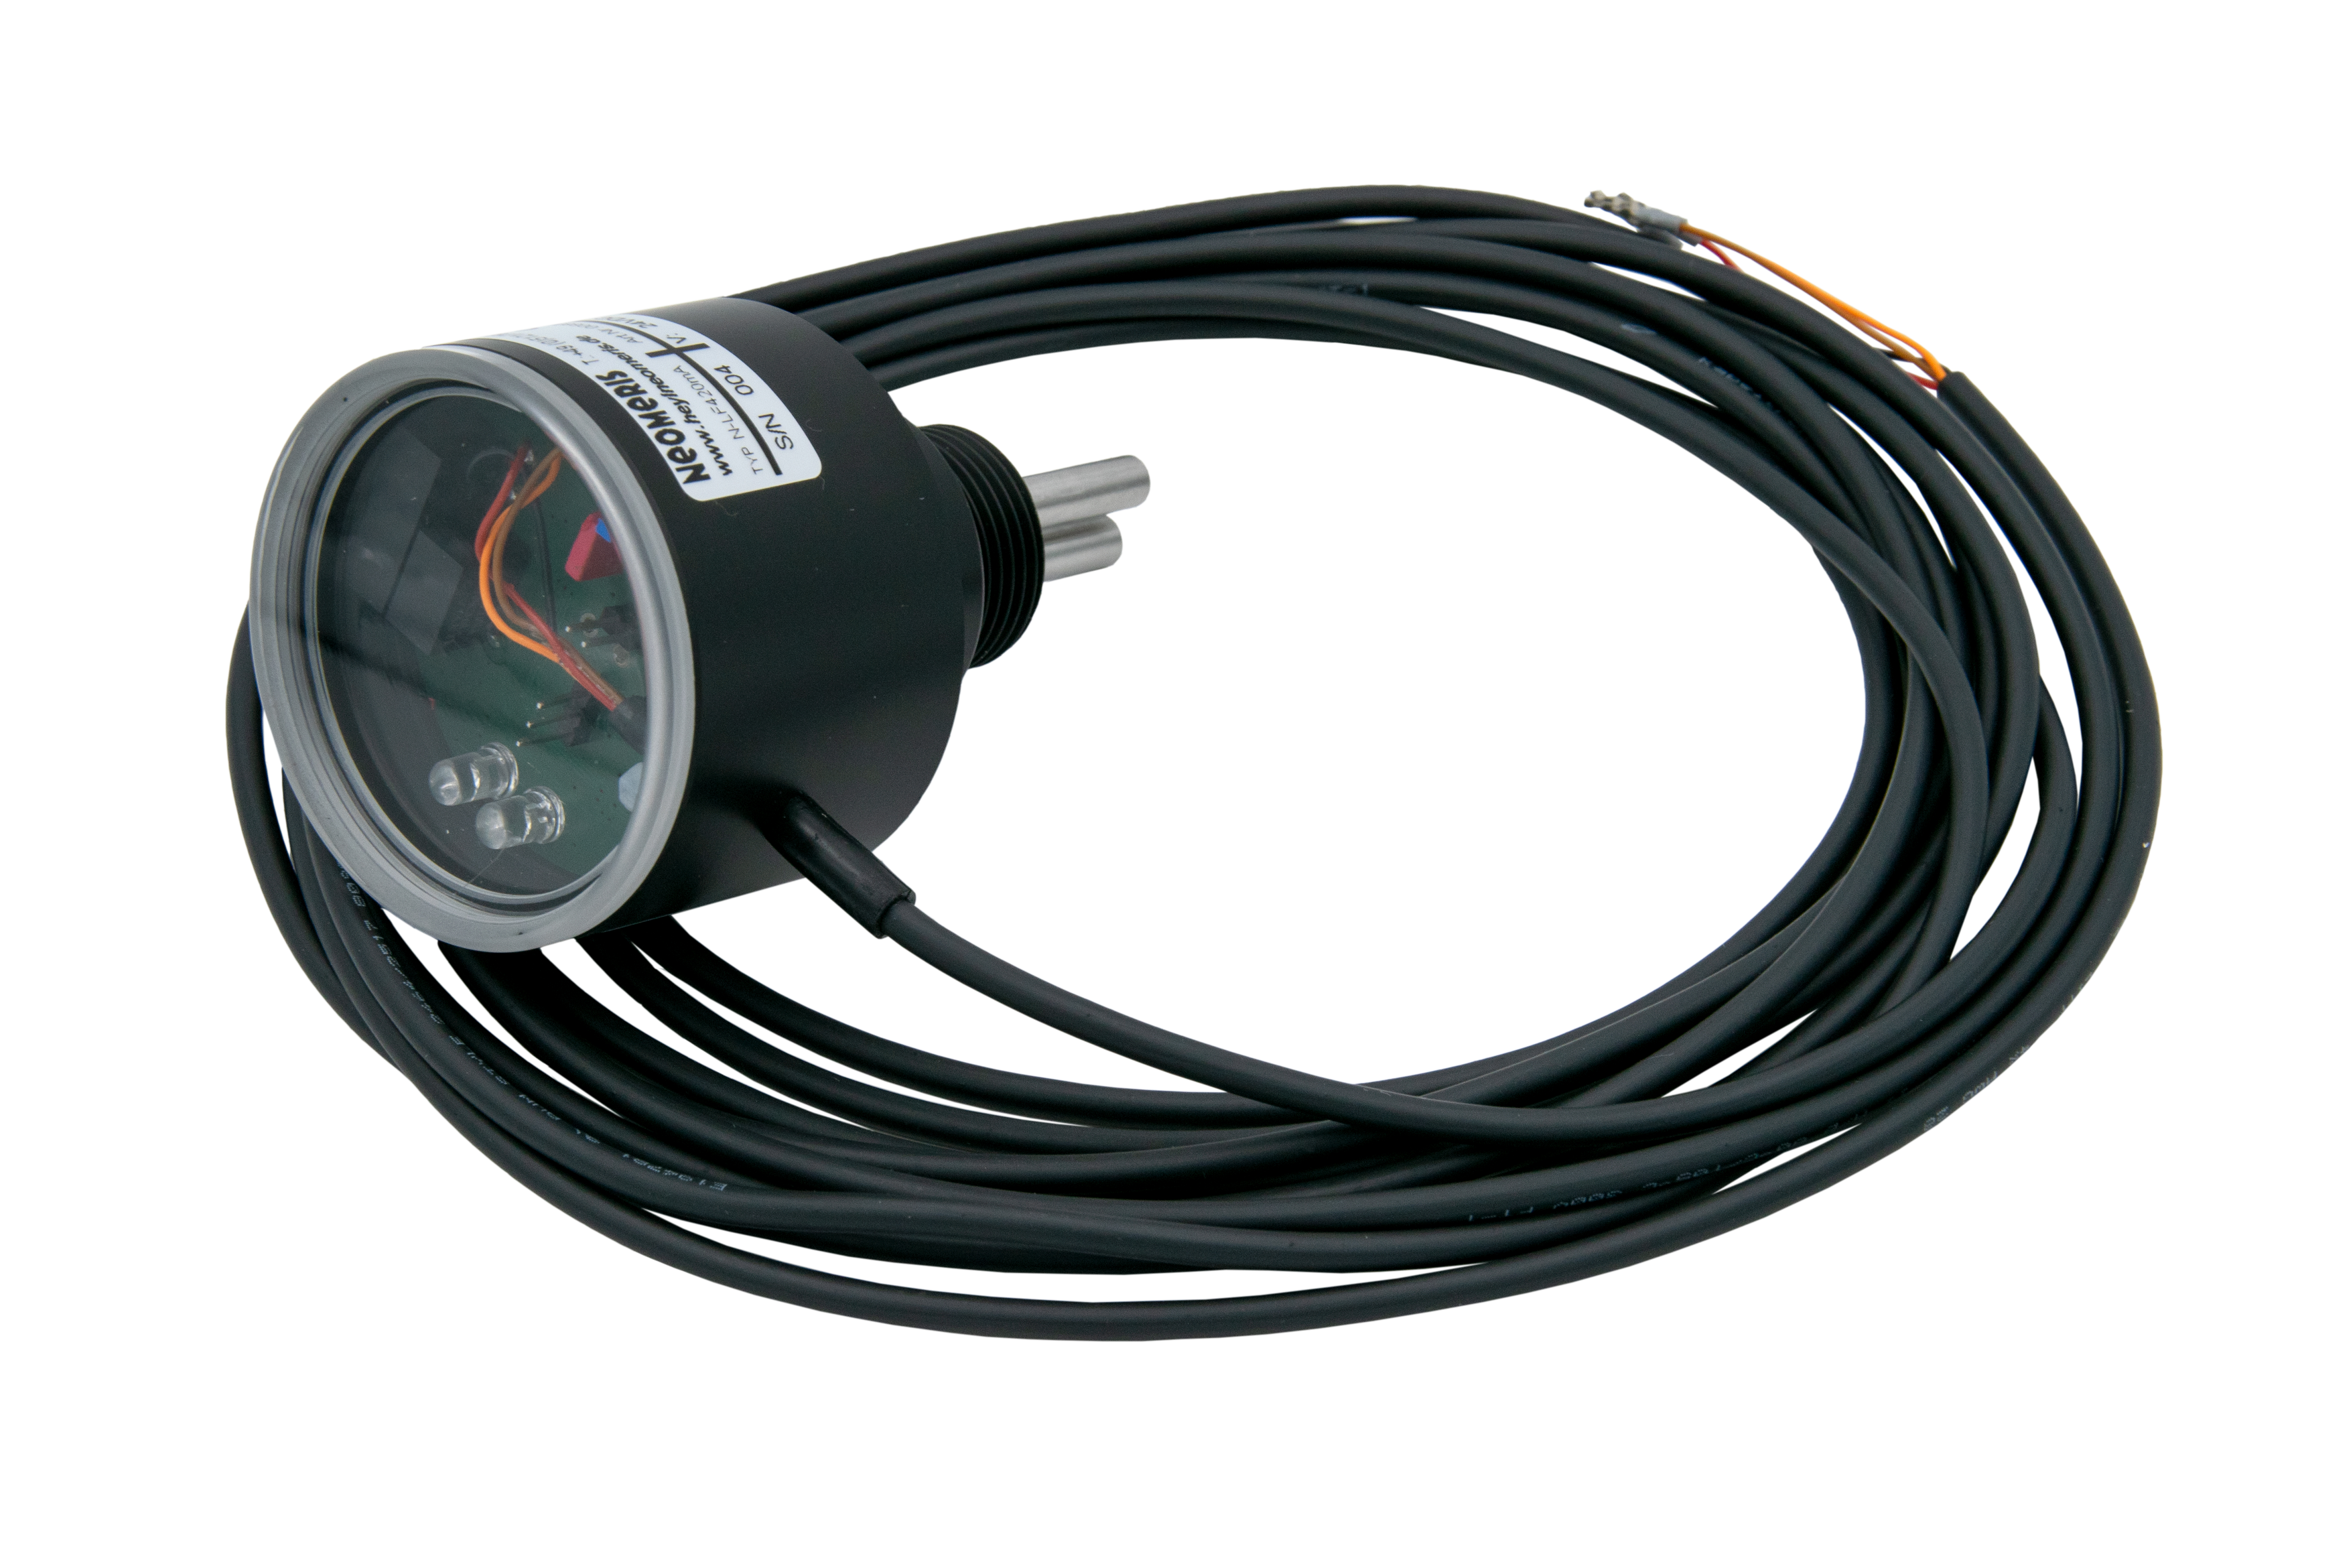 N-LF420 Conductivity meter 0-50µS with 4-20mA output, LED display and 3/4 inch screw-in thread